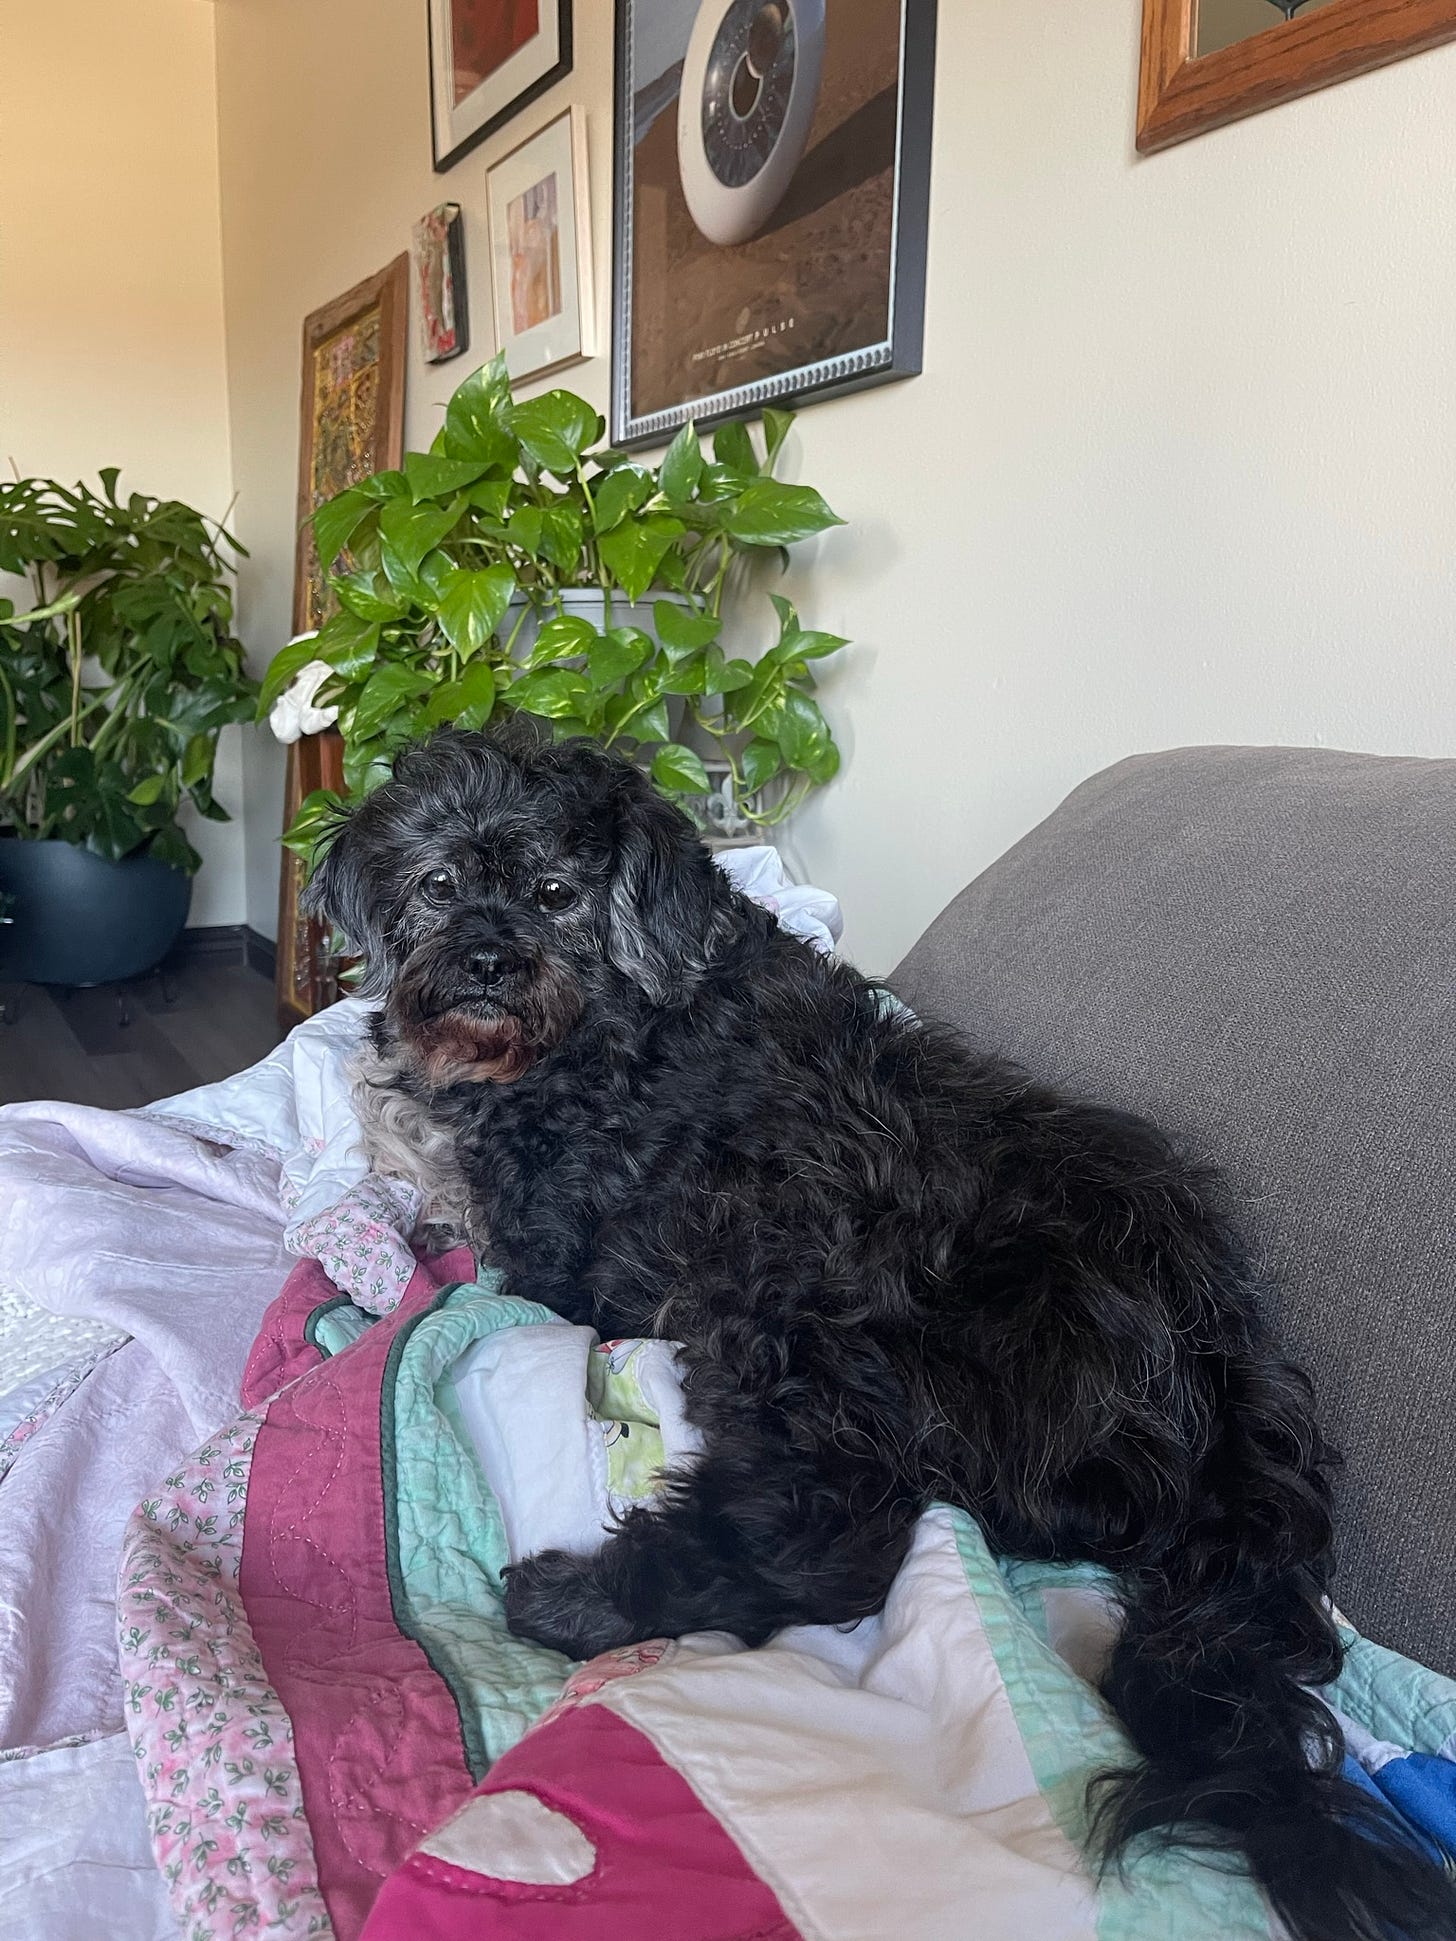 A small black dog with a curly coat and some grey around his ears and muzzle stands on pink and green quilt on a grey couch. Two potted plants can be seen in the background, and posters are hung on a white wall.